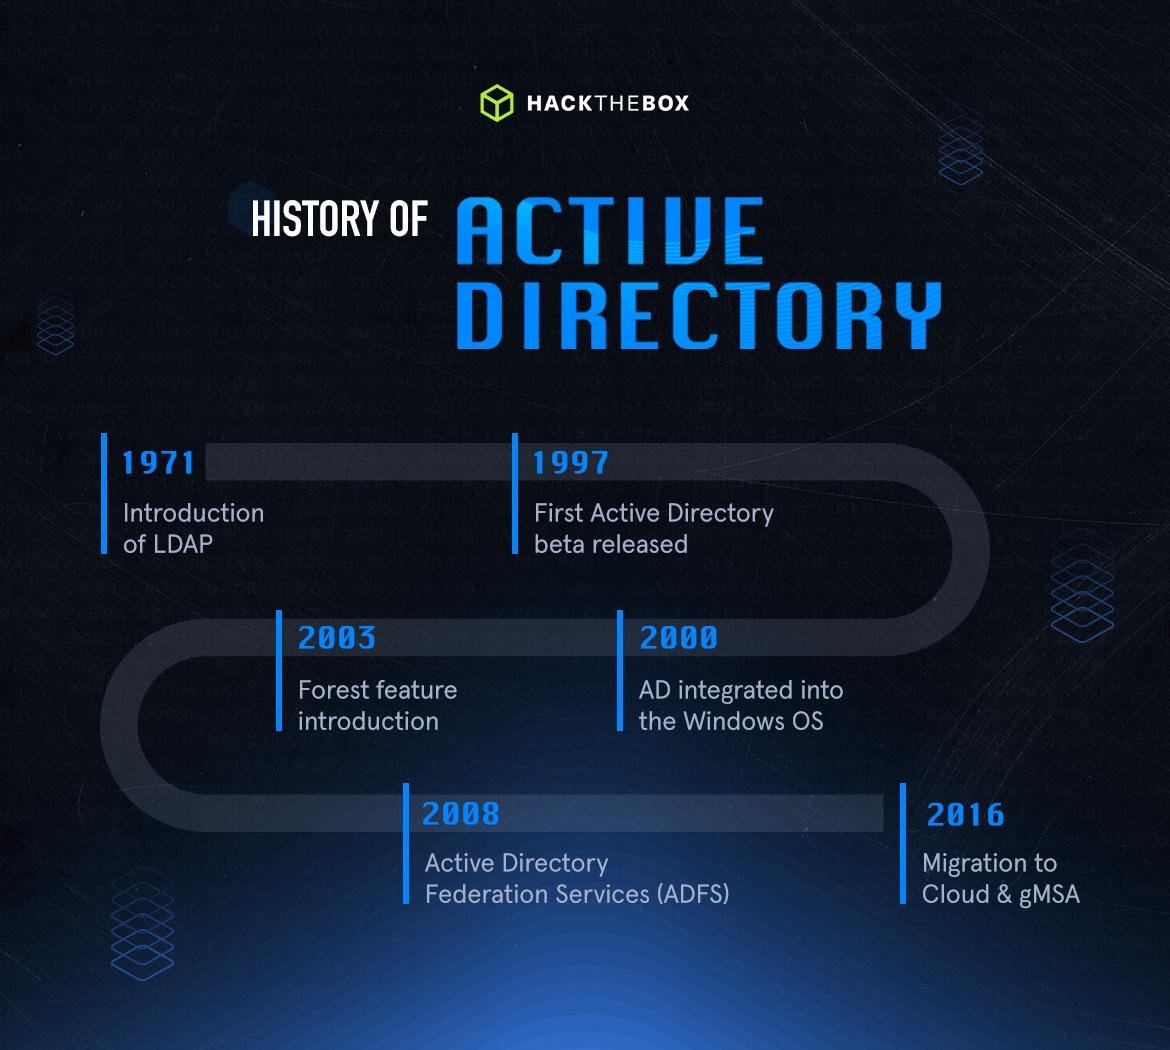 History of Active Directory Timeline